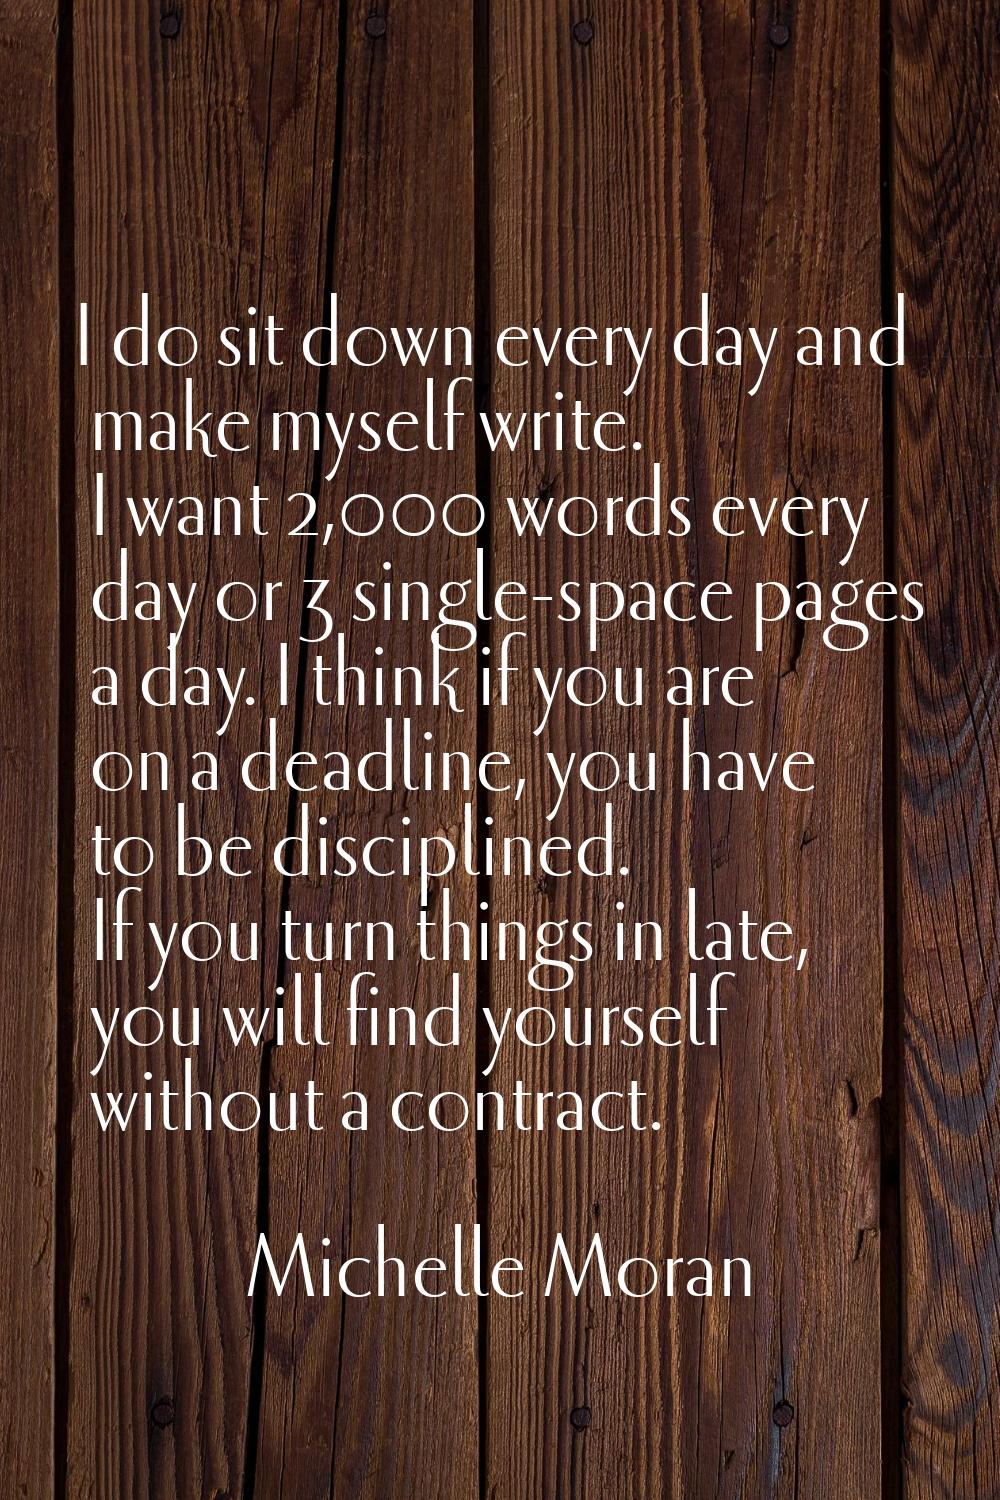 I do sit down every day and make myself write. I want 2,000 words every day or 3 single-space pages